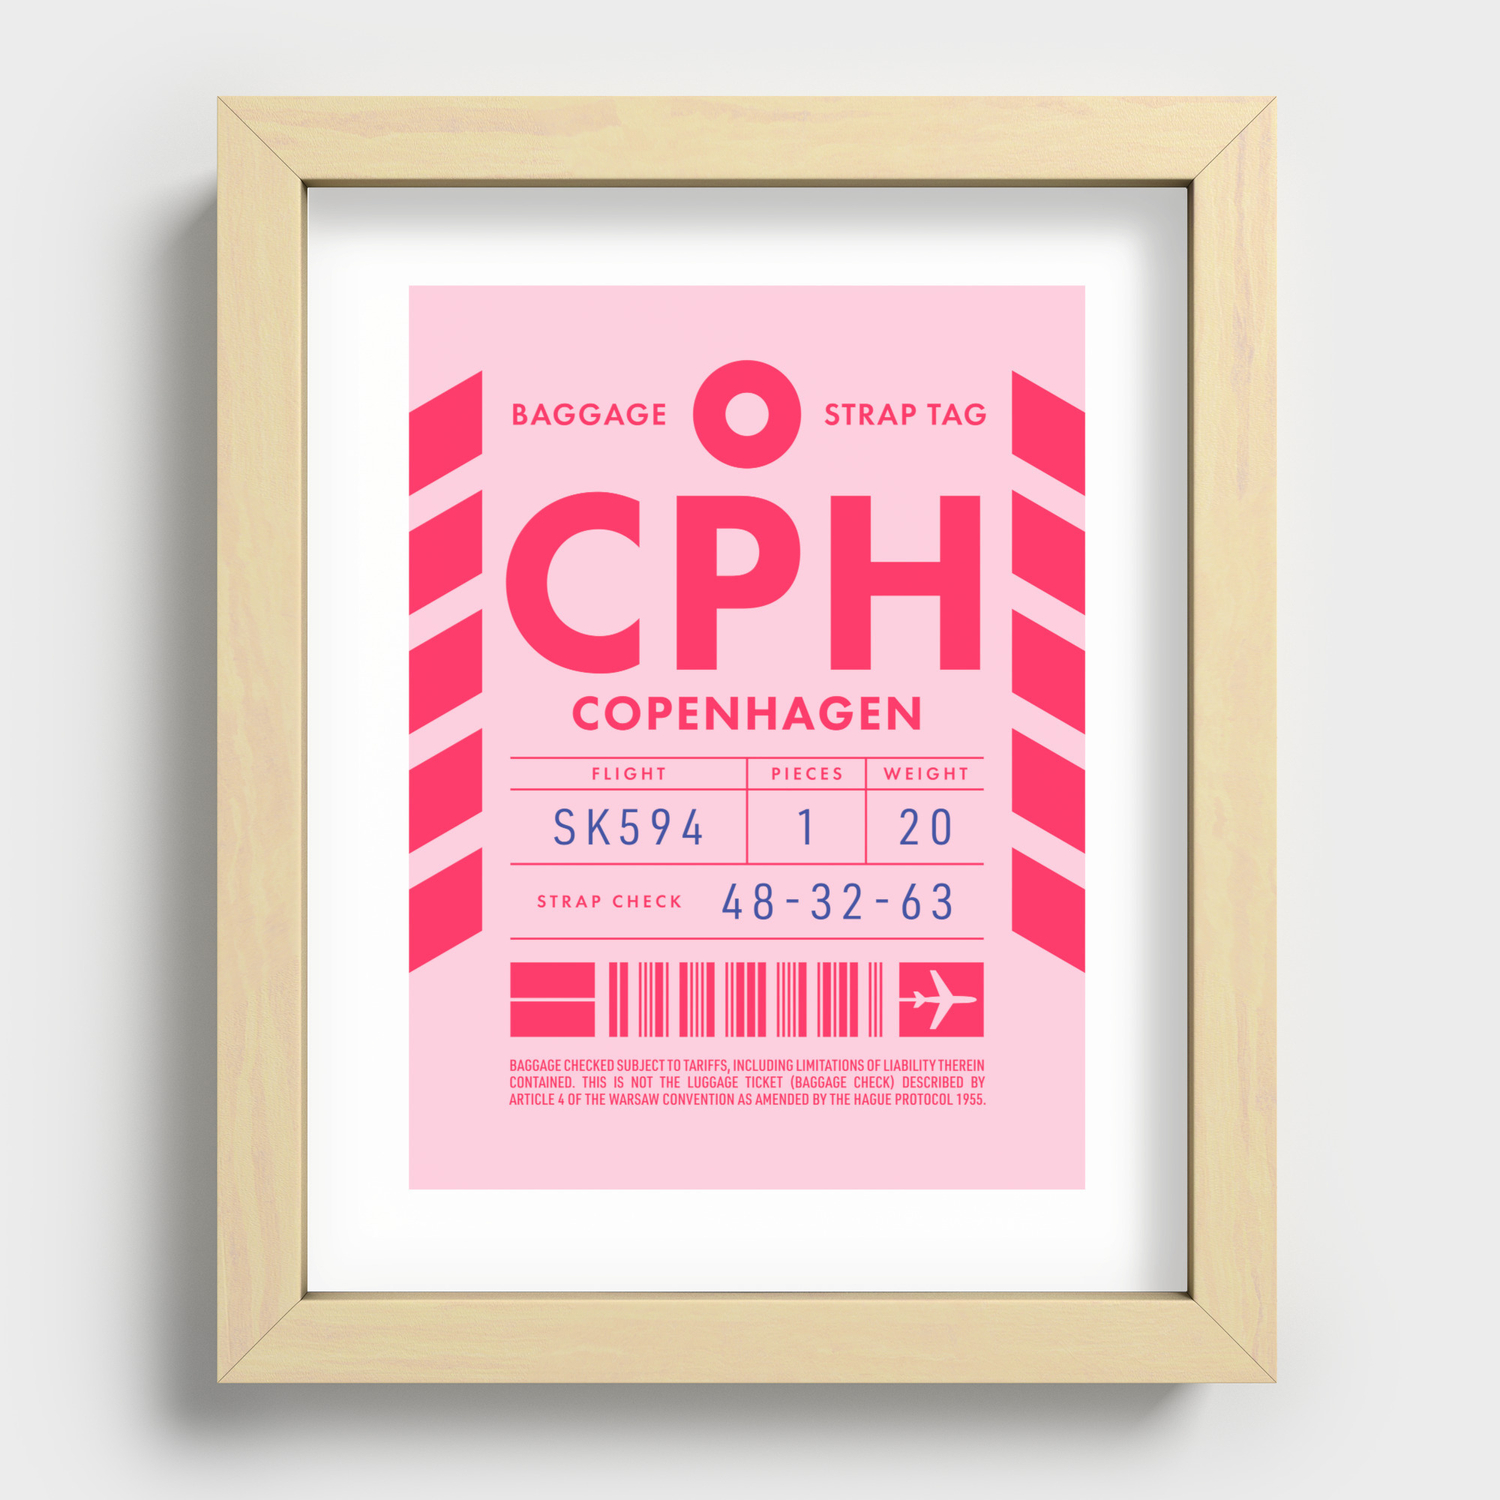 reductor Ond At blokere Luggage Tag D - CPH Copenhagen Denmark Recessed Framed Print by neotokyo |  Society6